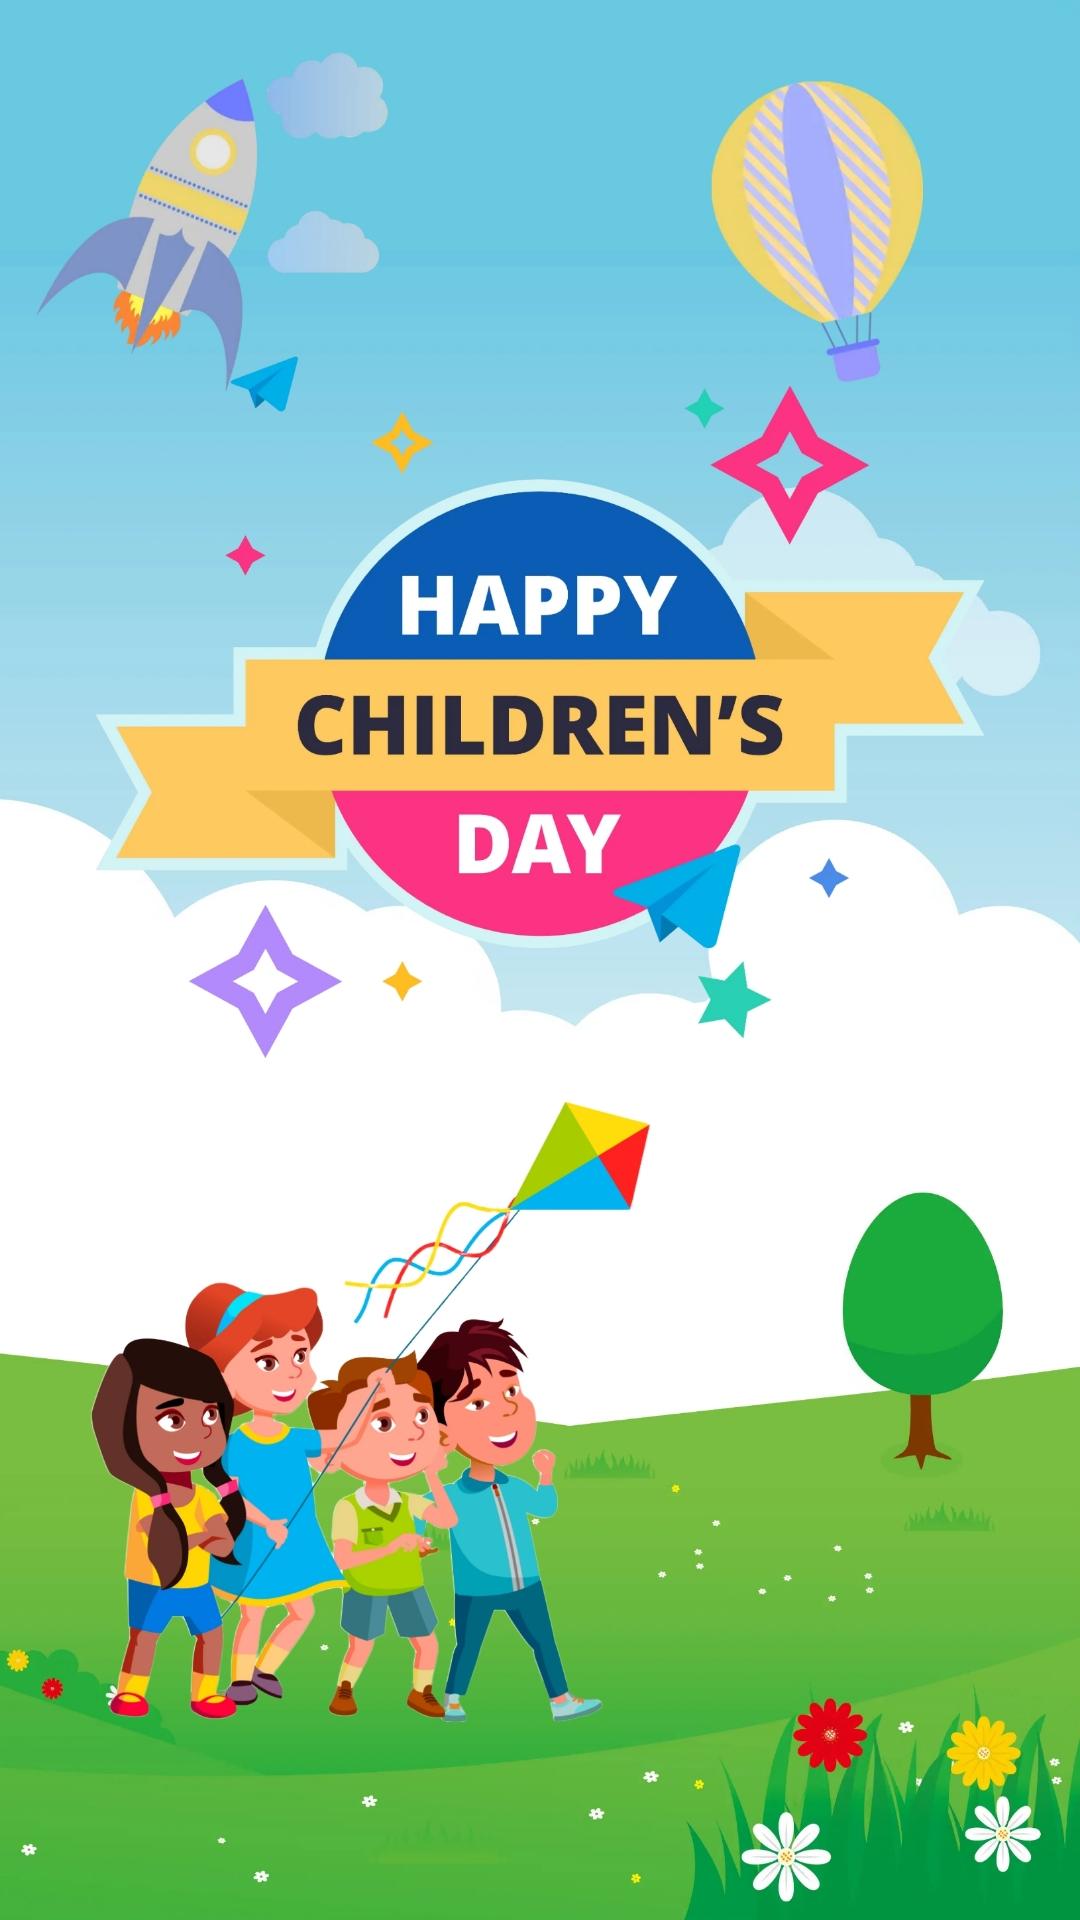 1080p Happy Childrens Day Wallpaper HD Download